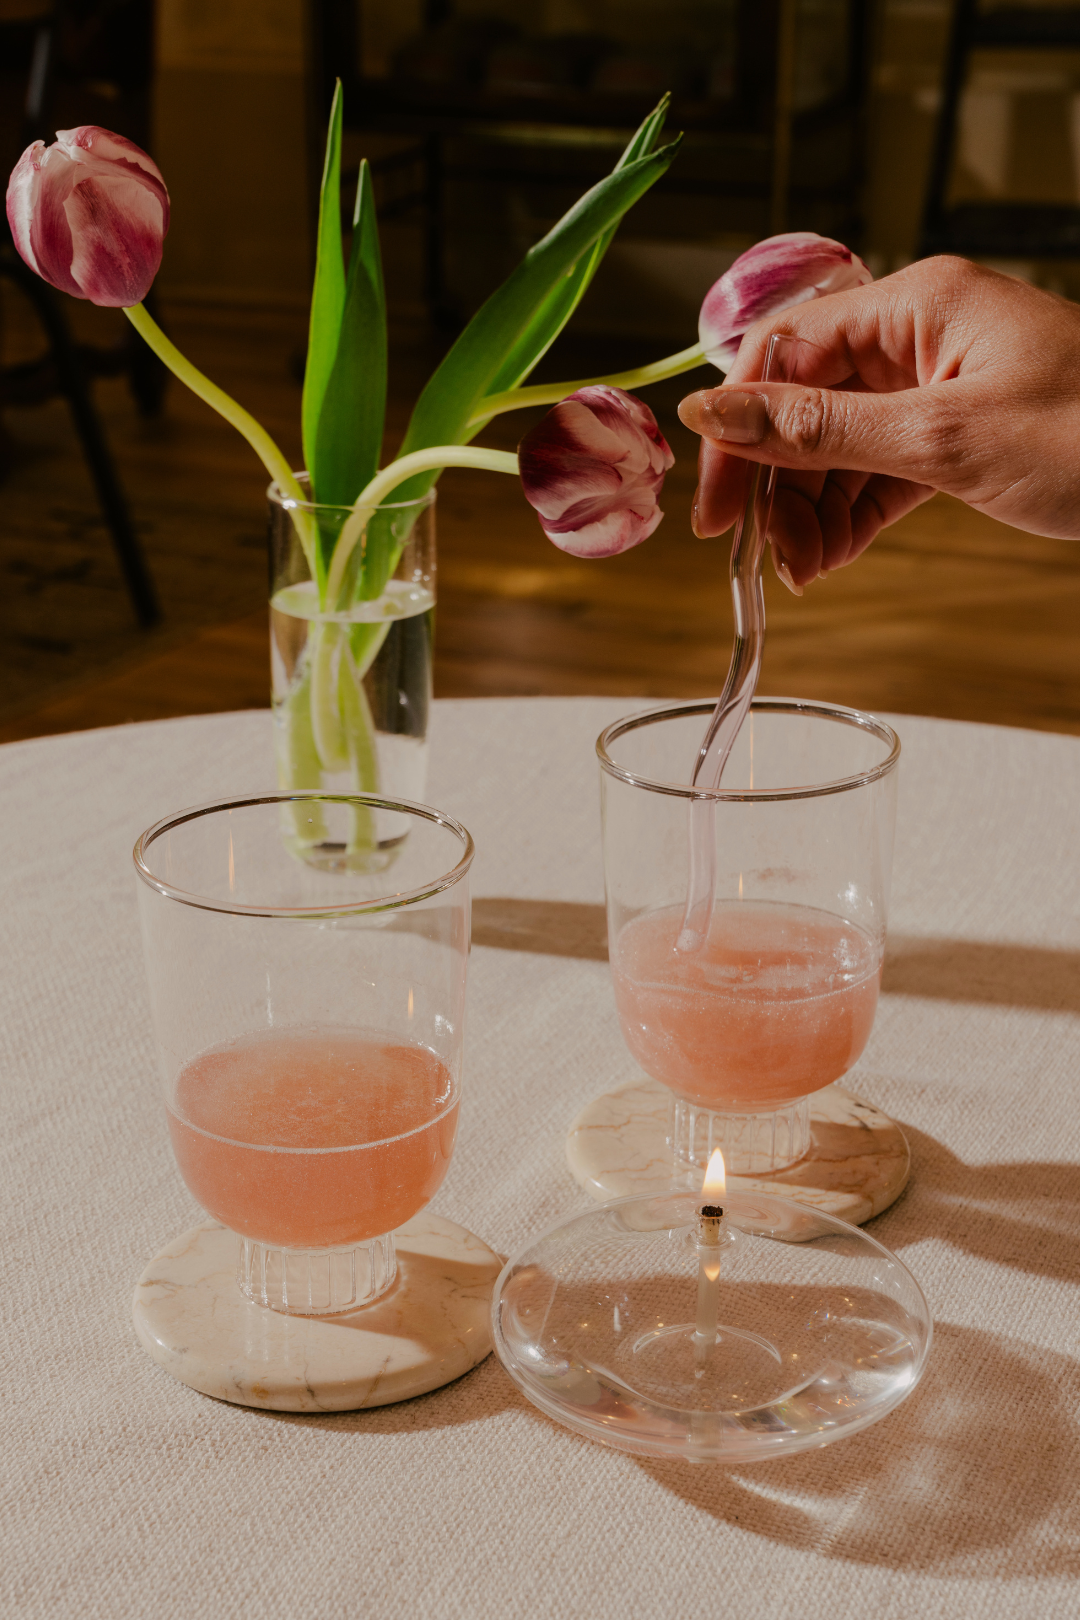 Set of two stemless wine glasses with rose sprinkled with glitter being gently stirred with a blush pink glass straw. The stemless wine glass sits on a marble coaster, its simplicity and elegance highlighted by the warm glow of the candle. The clear champagne glasses has been used as bud vase with slender tulips. This scene suggests a relaxed yet sophisticated setting, possibly a romantic dinner or a cute dinner with the girlies.